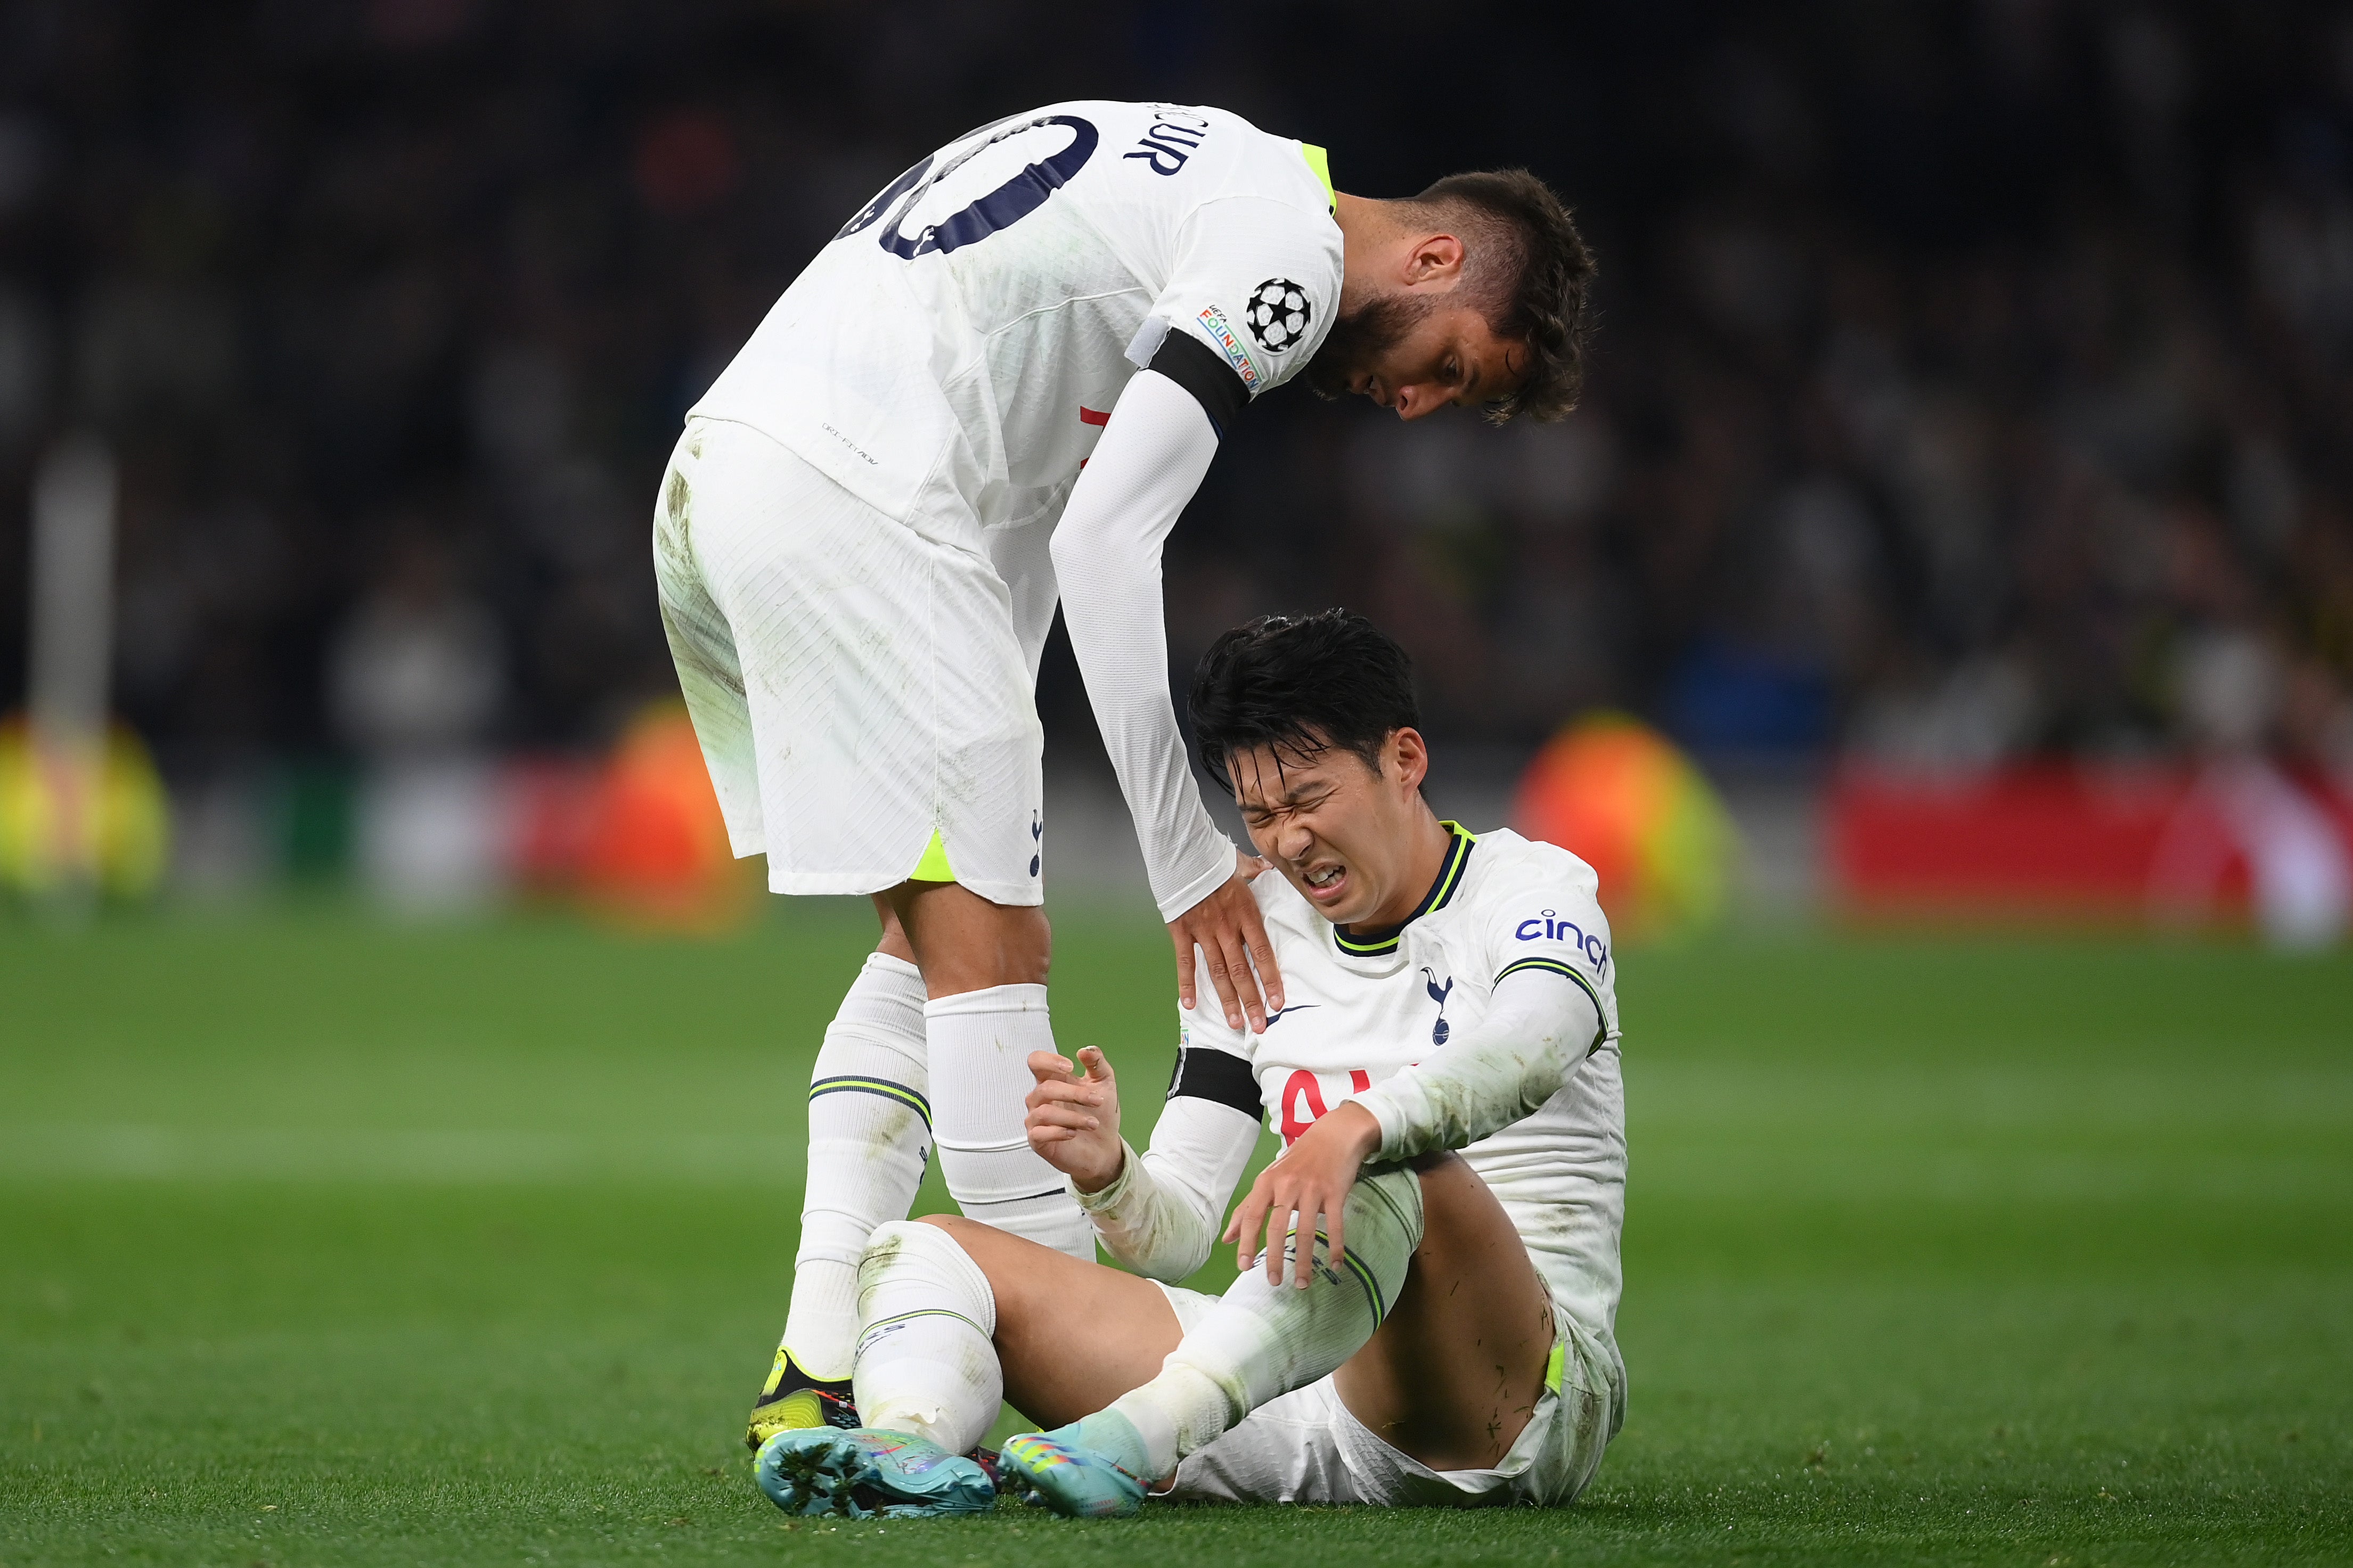 Son Heung-min has issued a statement after Rodrio Bentancur racist comment